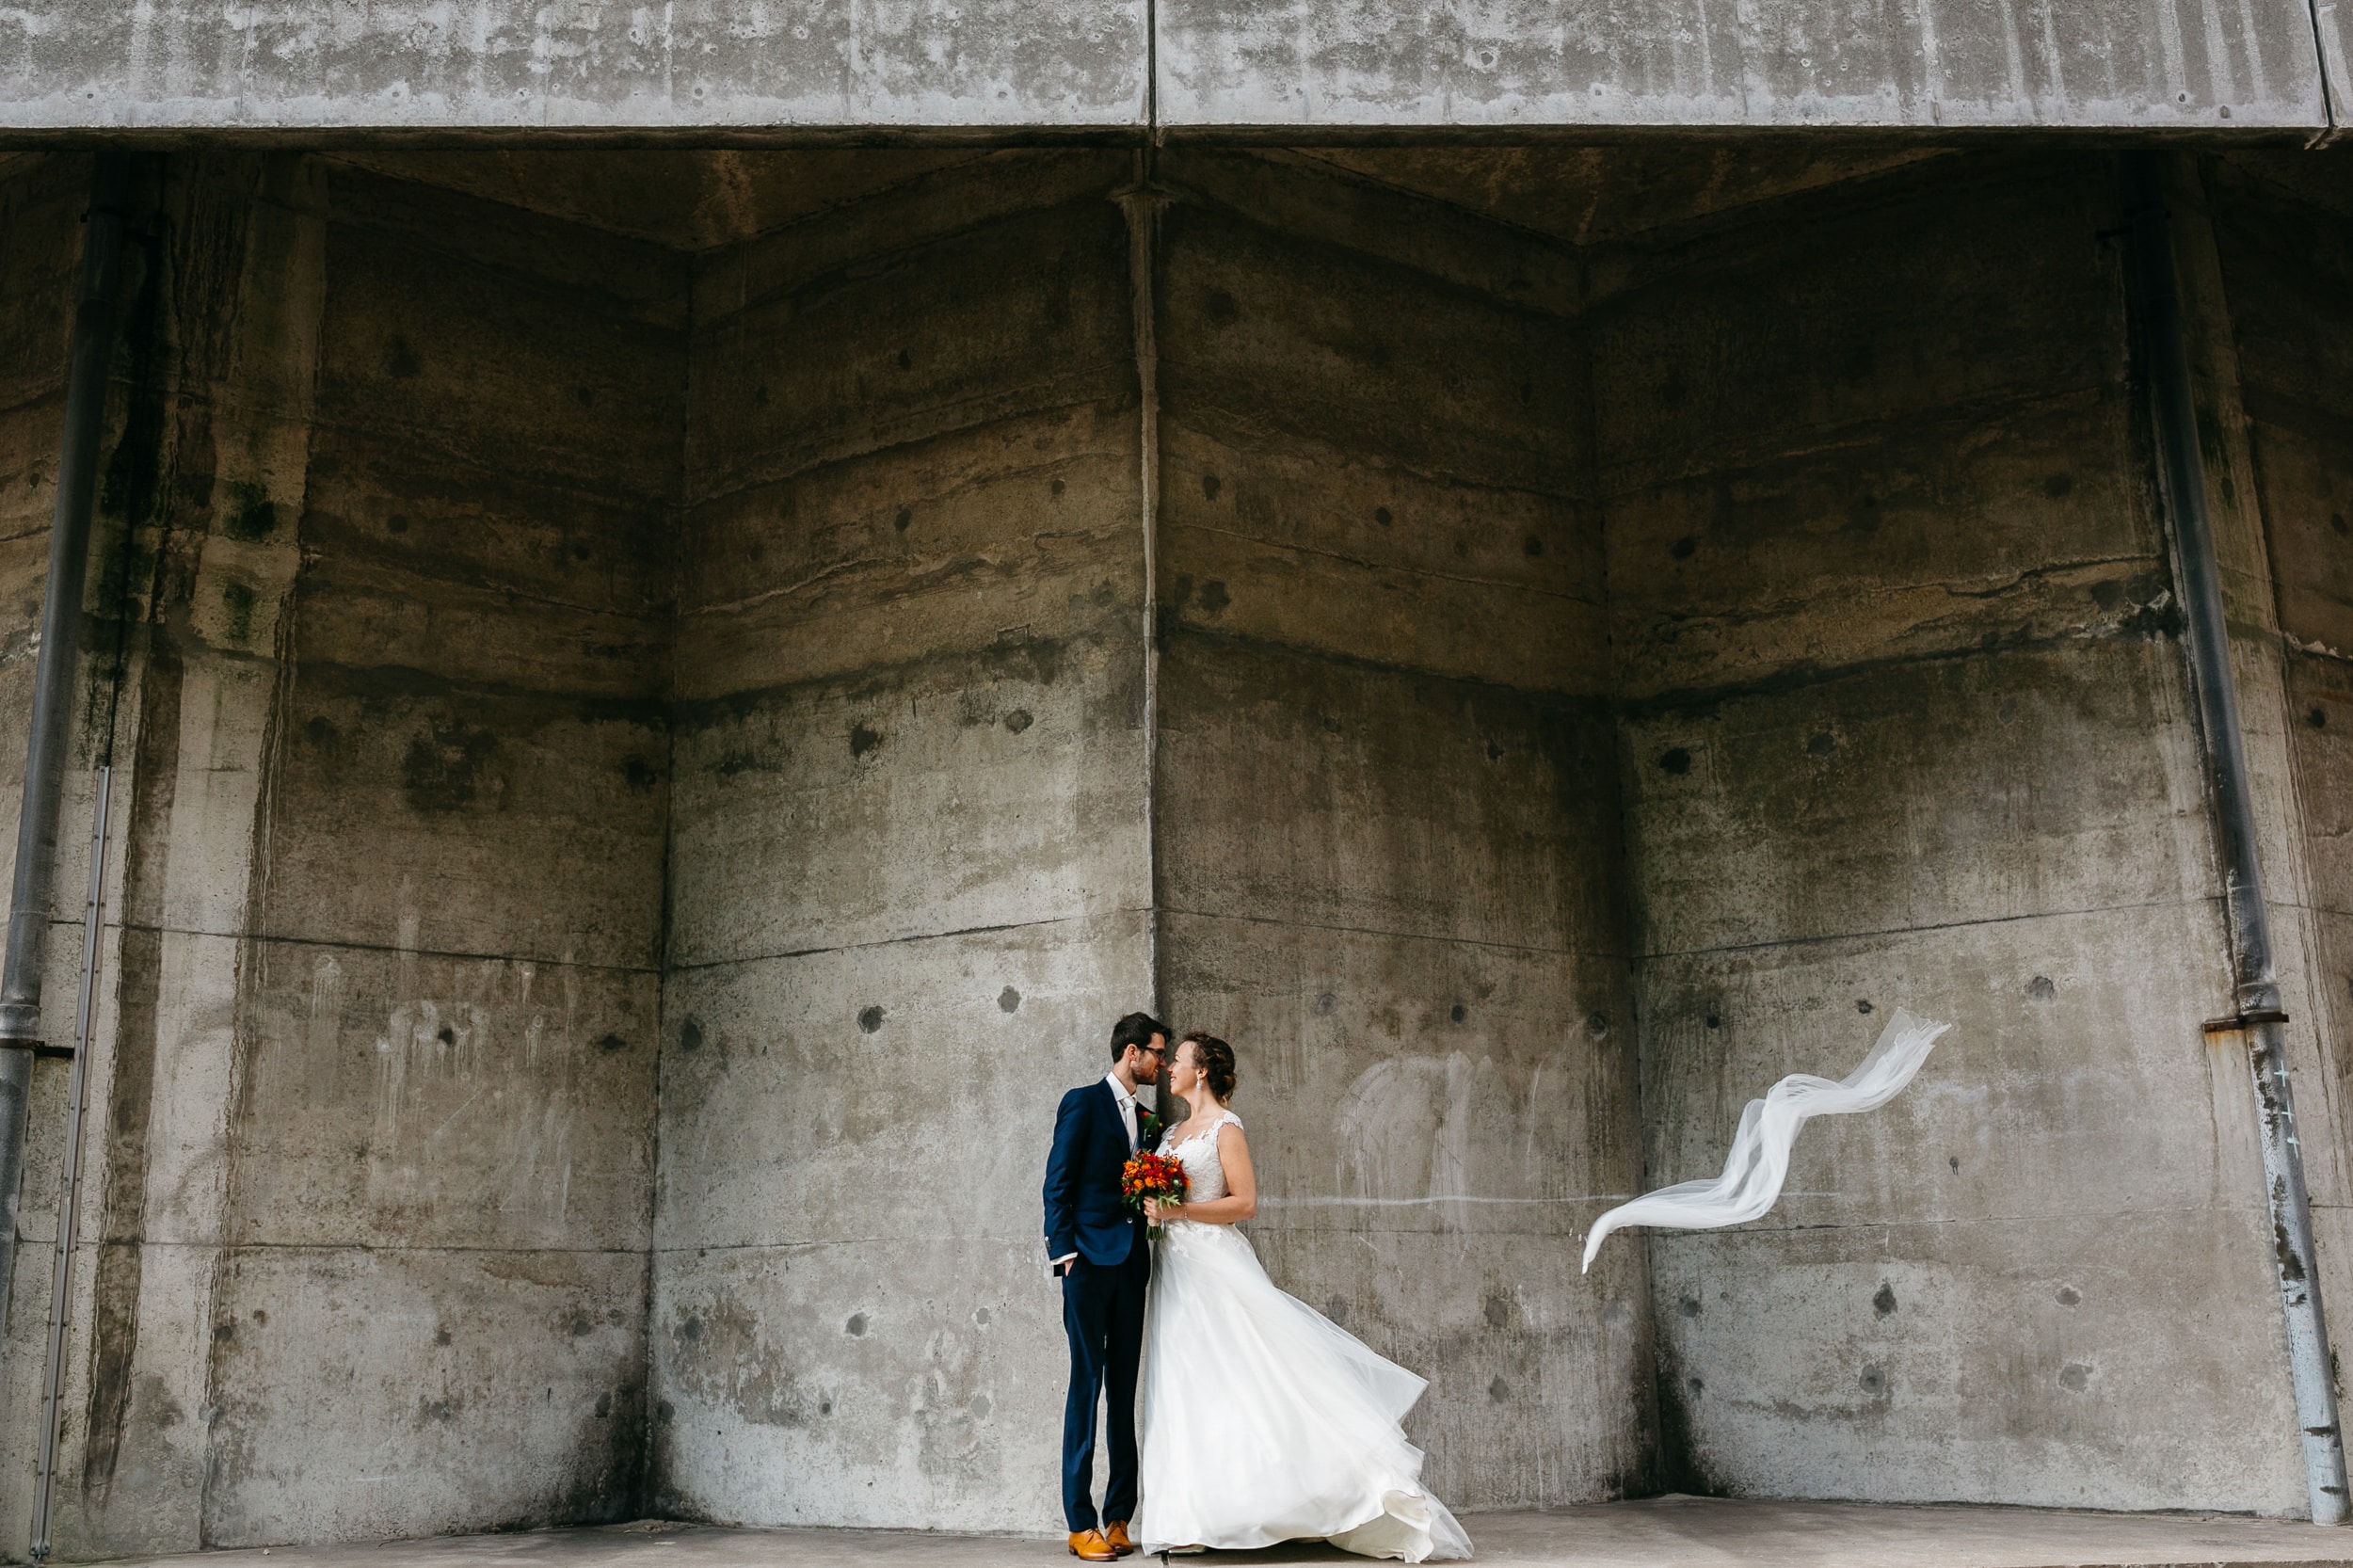 A bride and groom pose elegantly in front of a concrete wall, with the bride wearing a beautiful A-line wedding dress.